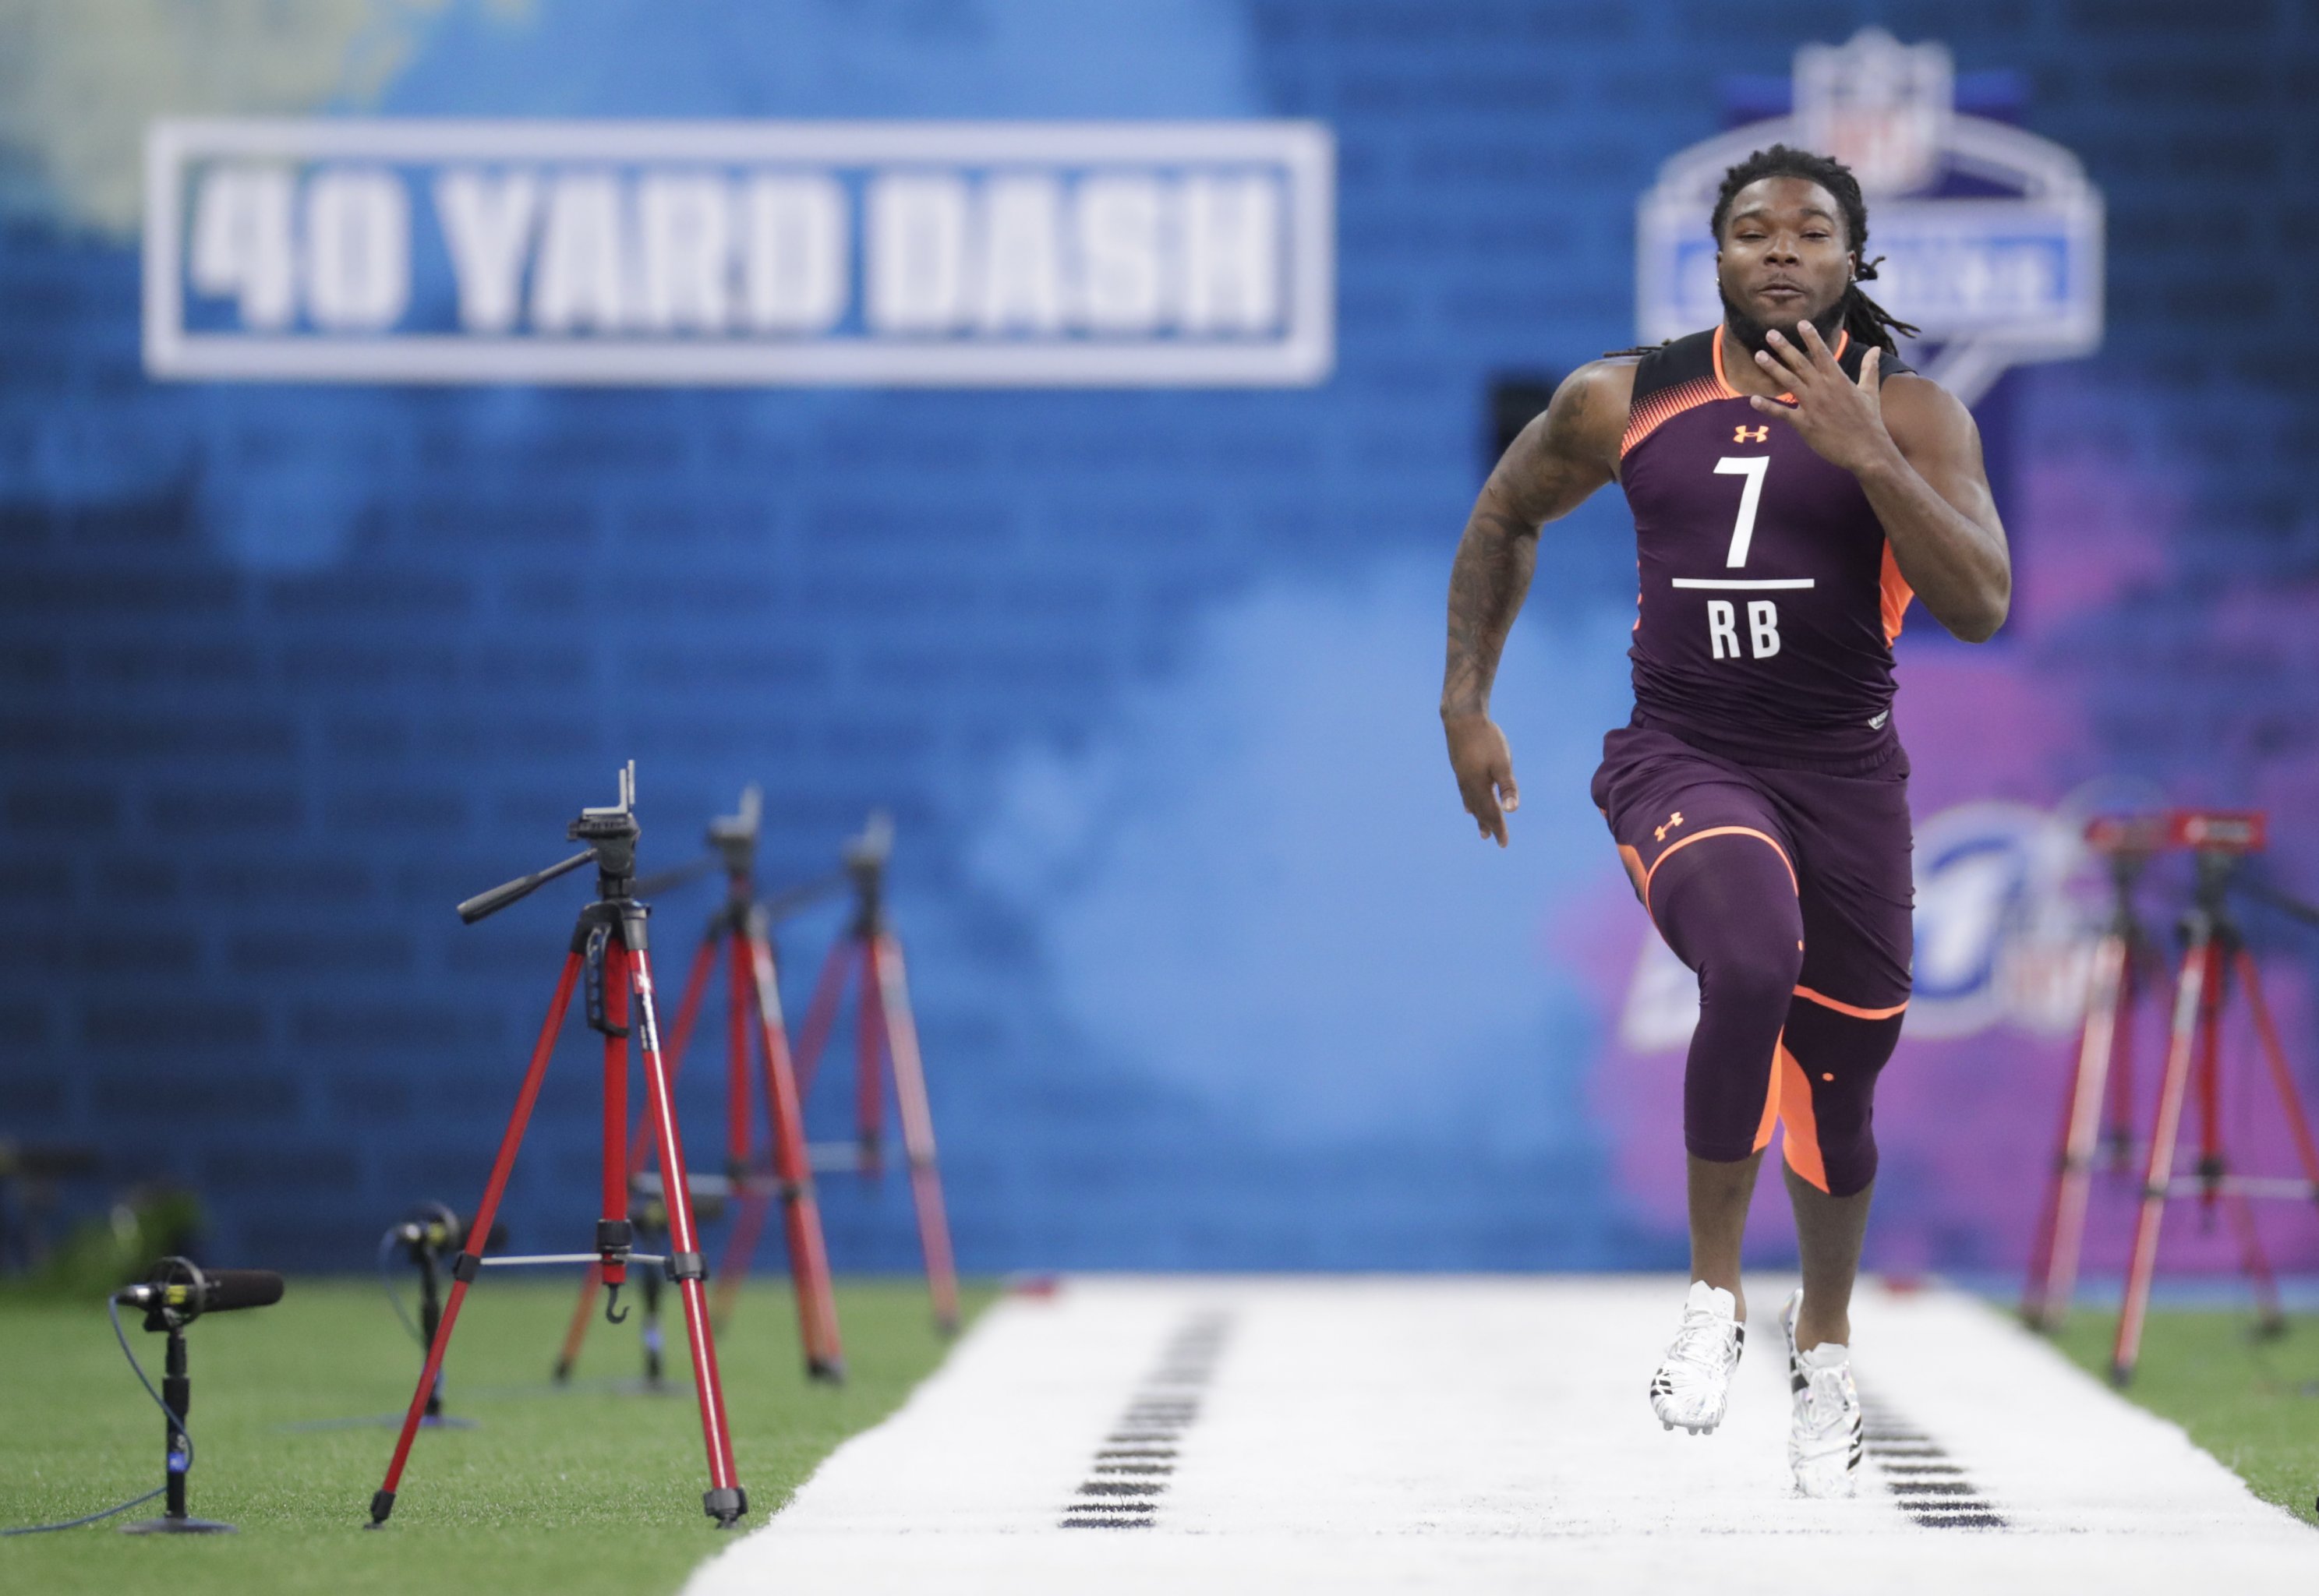 NFL Draft 2019: Picks tracker and live chat - Rounds 2 and 3 - The Phinsider